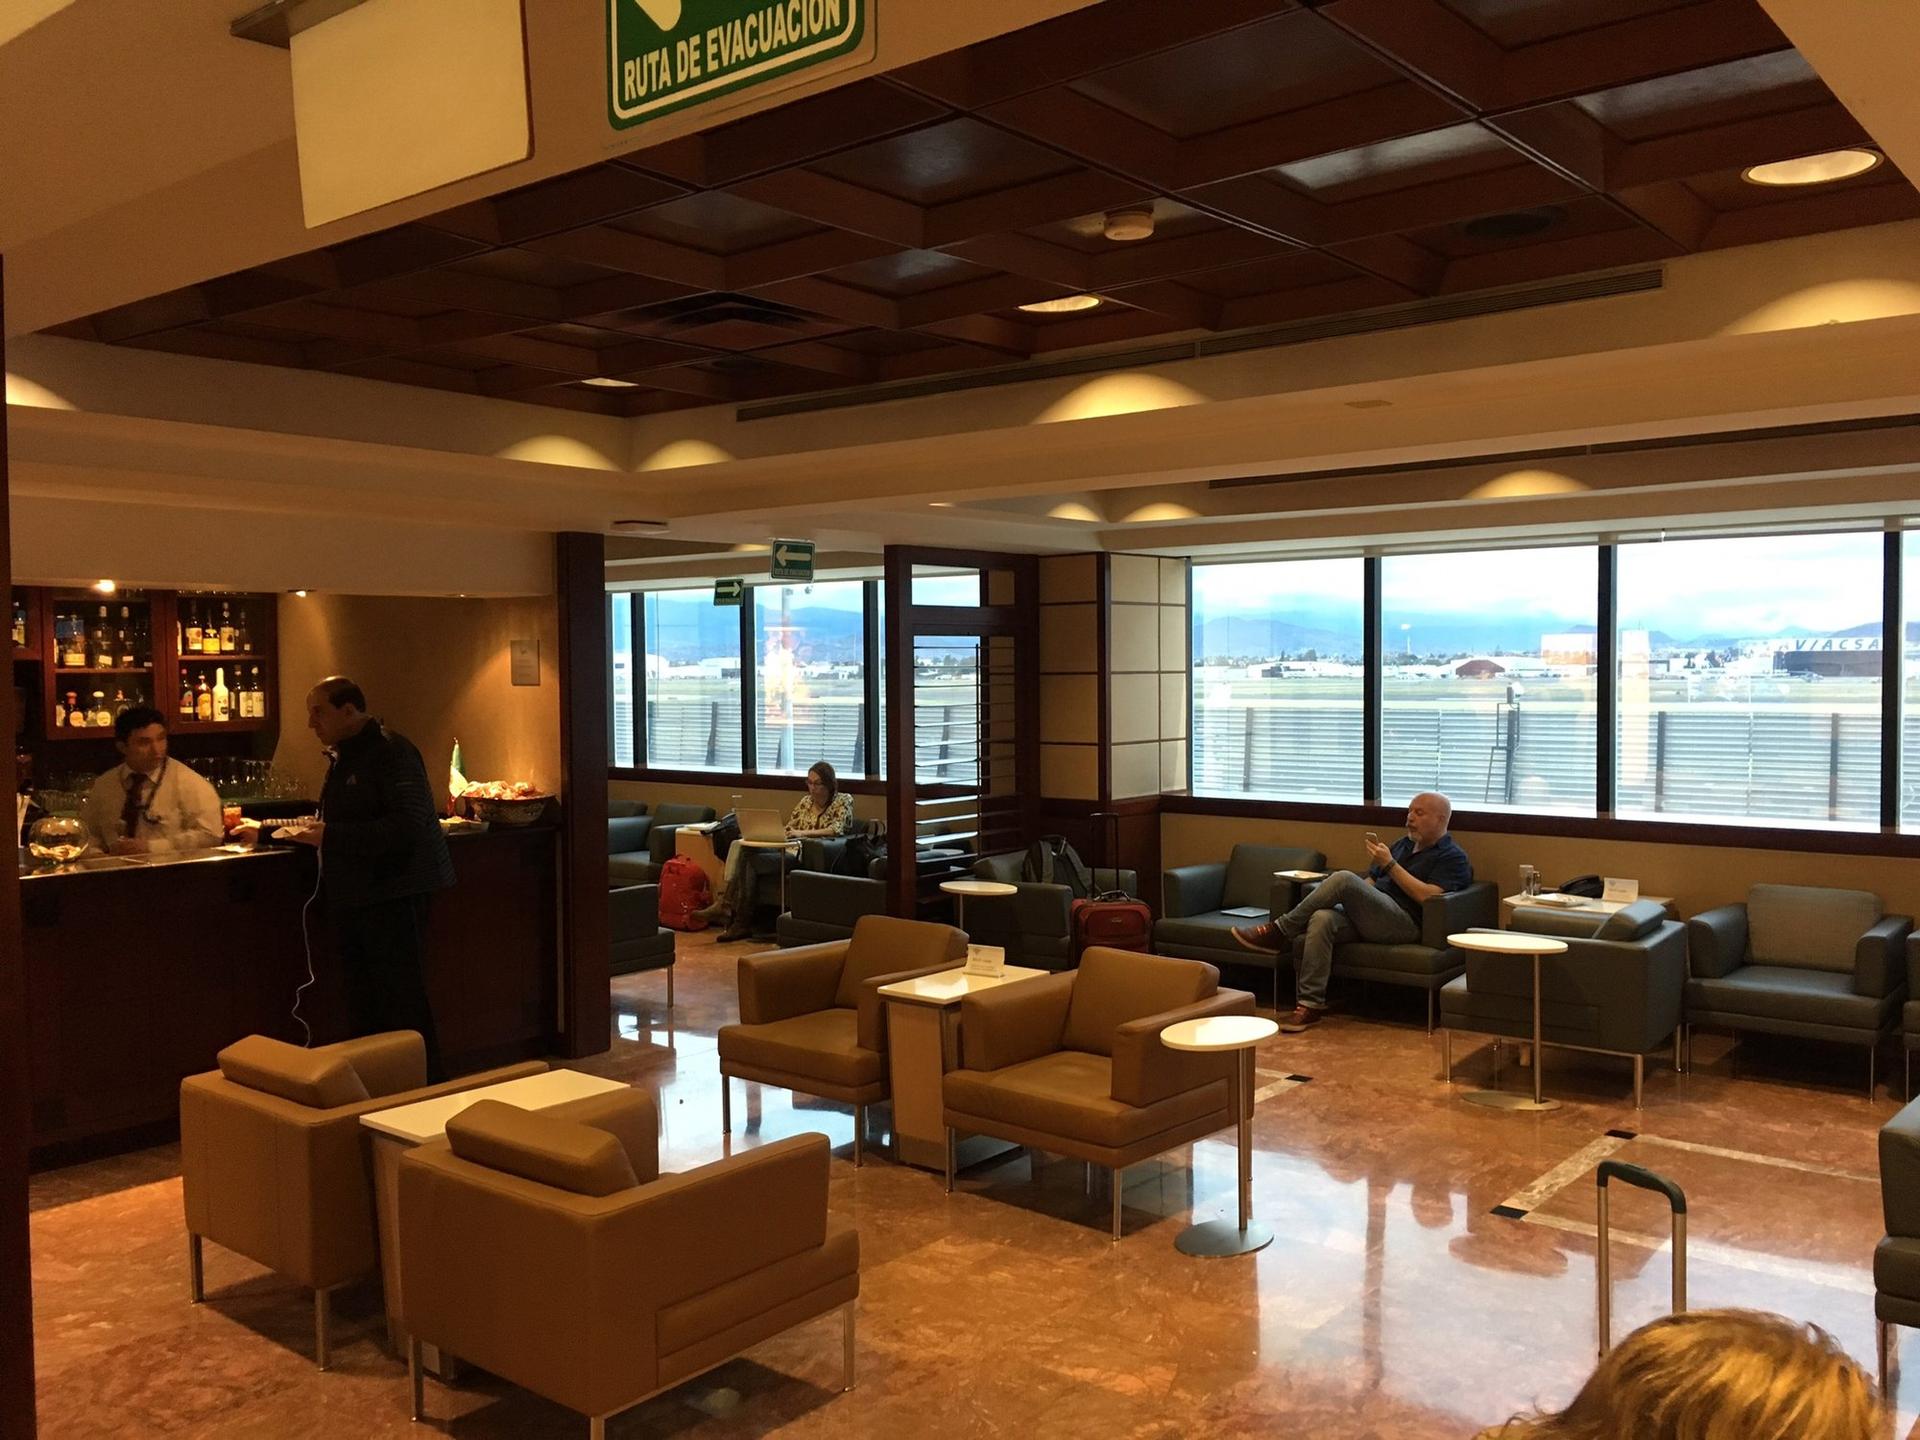 American Airlines Admirals Club image 21 of 32